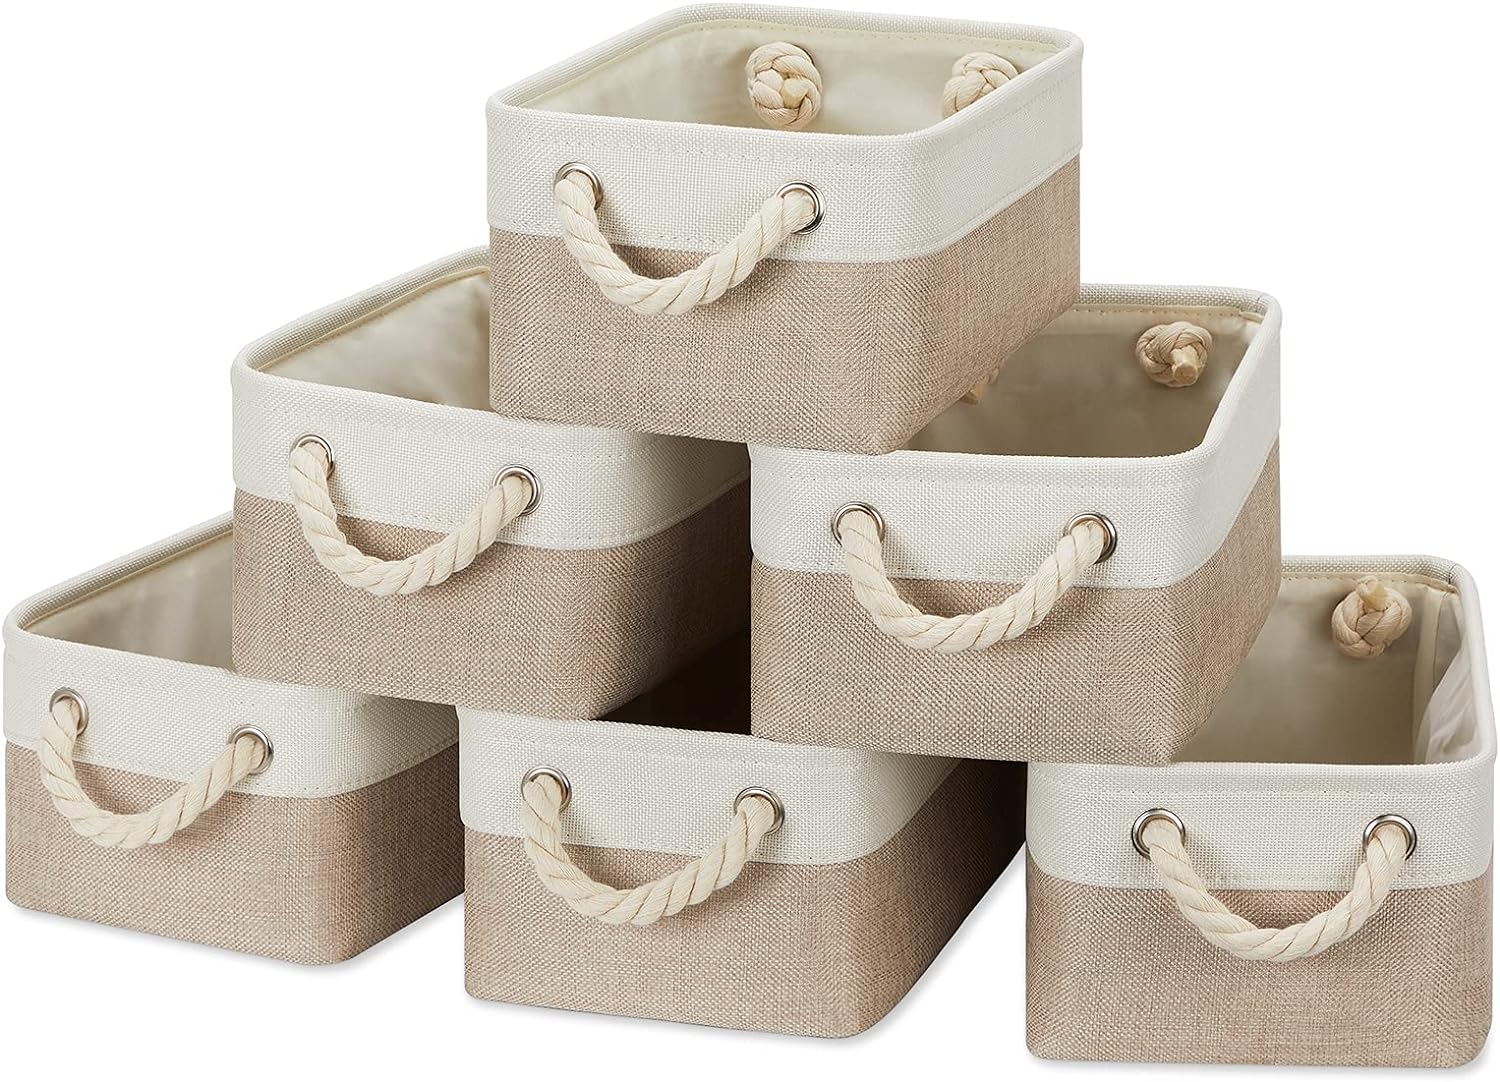 Temary Small Fabric Storage Baskets 6 Pcs Decorative Baskets Bins for Gifts Empty Foldable Storage Baskets with Handles for Organizing Shelf, Towels, Toys (White&Khaki,11.8 L x 7.9 W x 5.3 H inches)